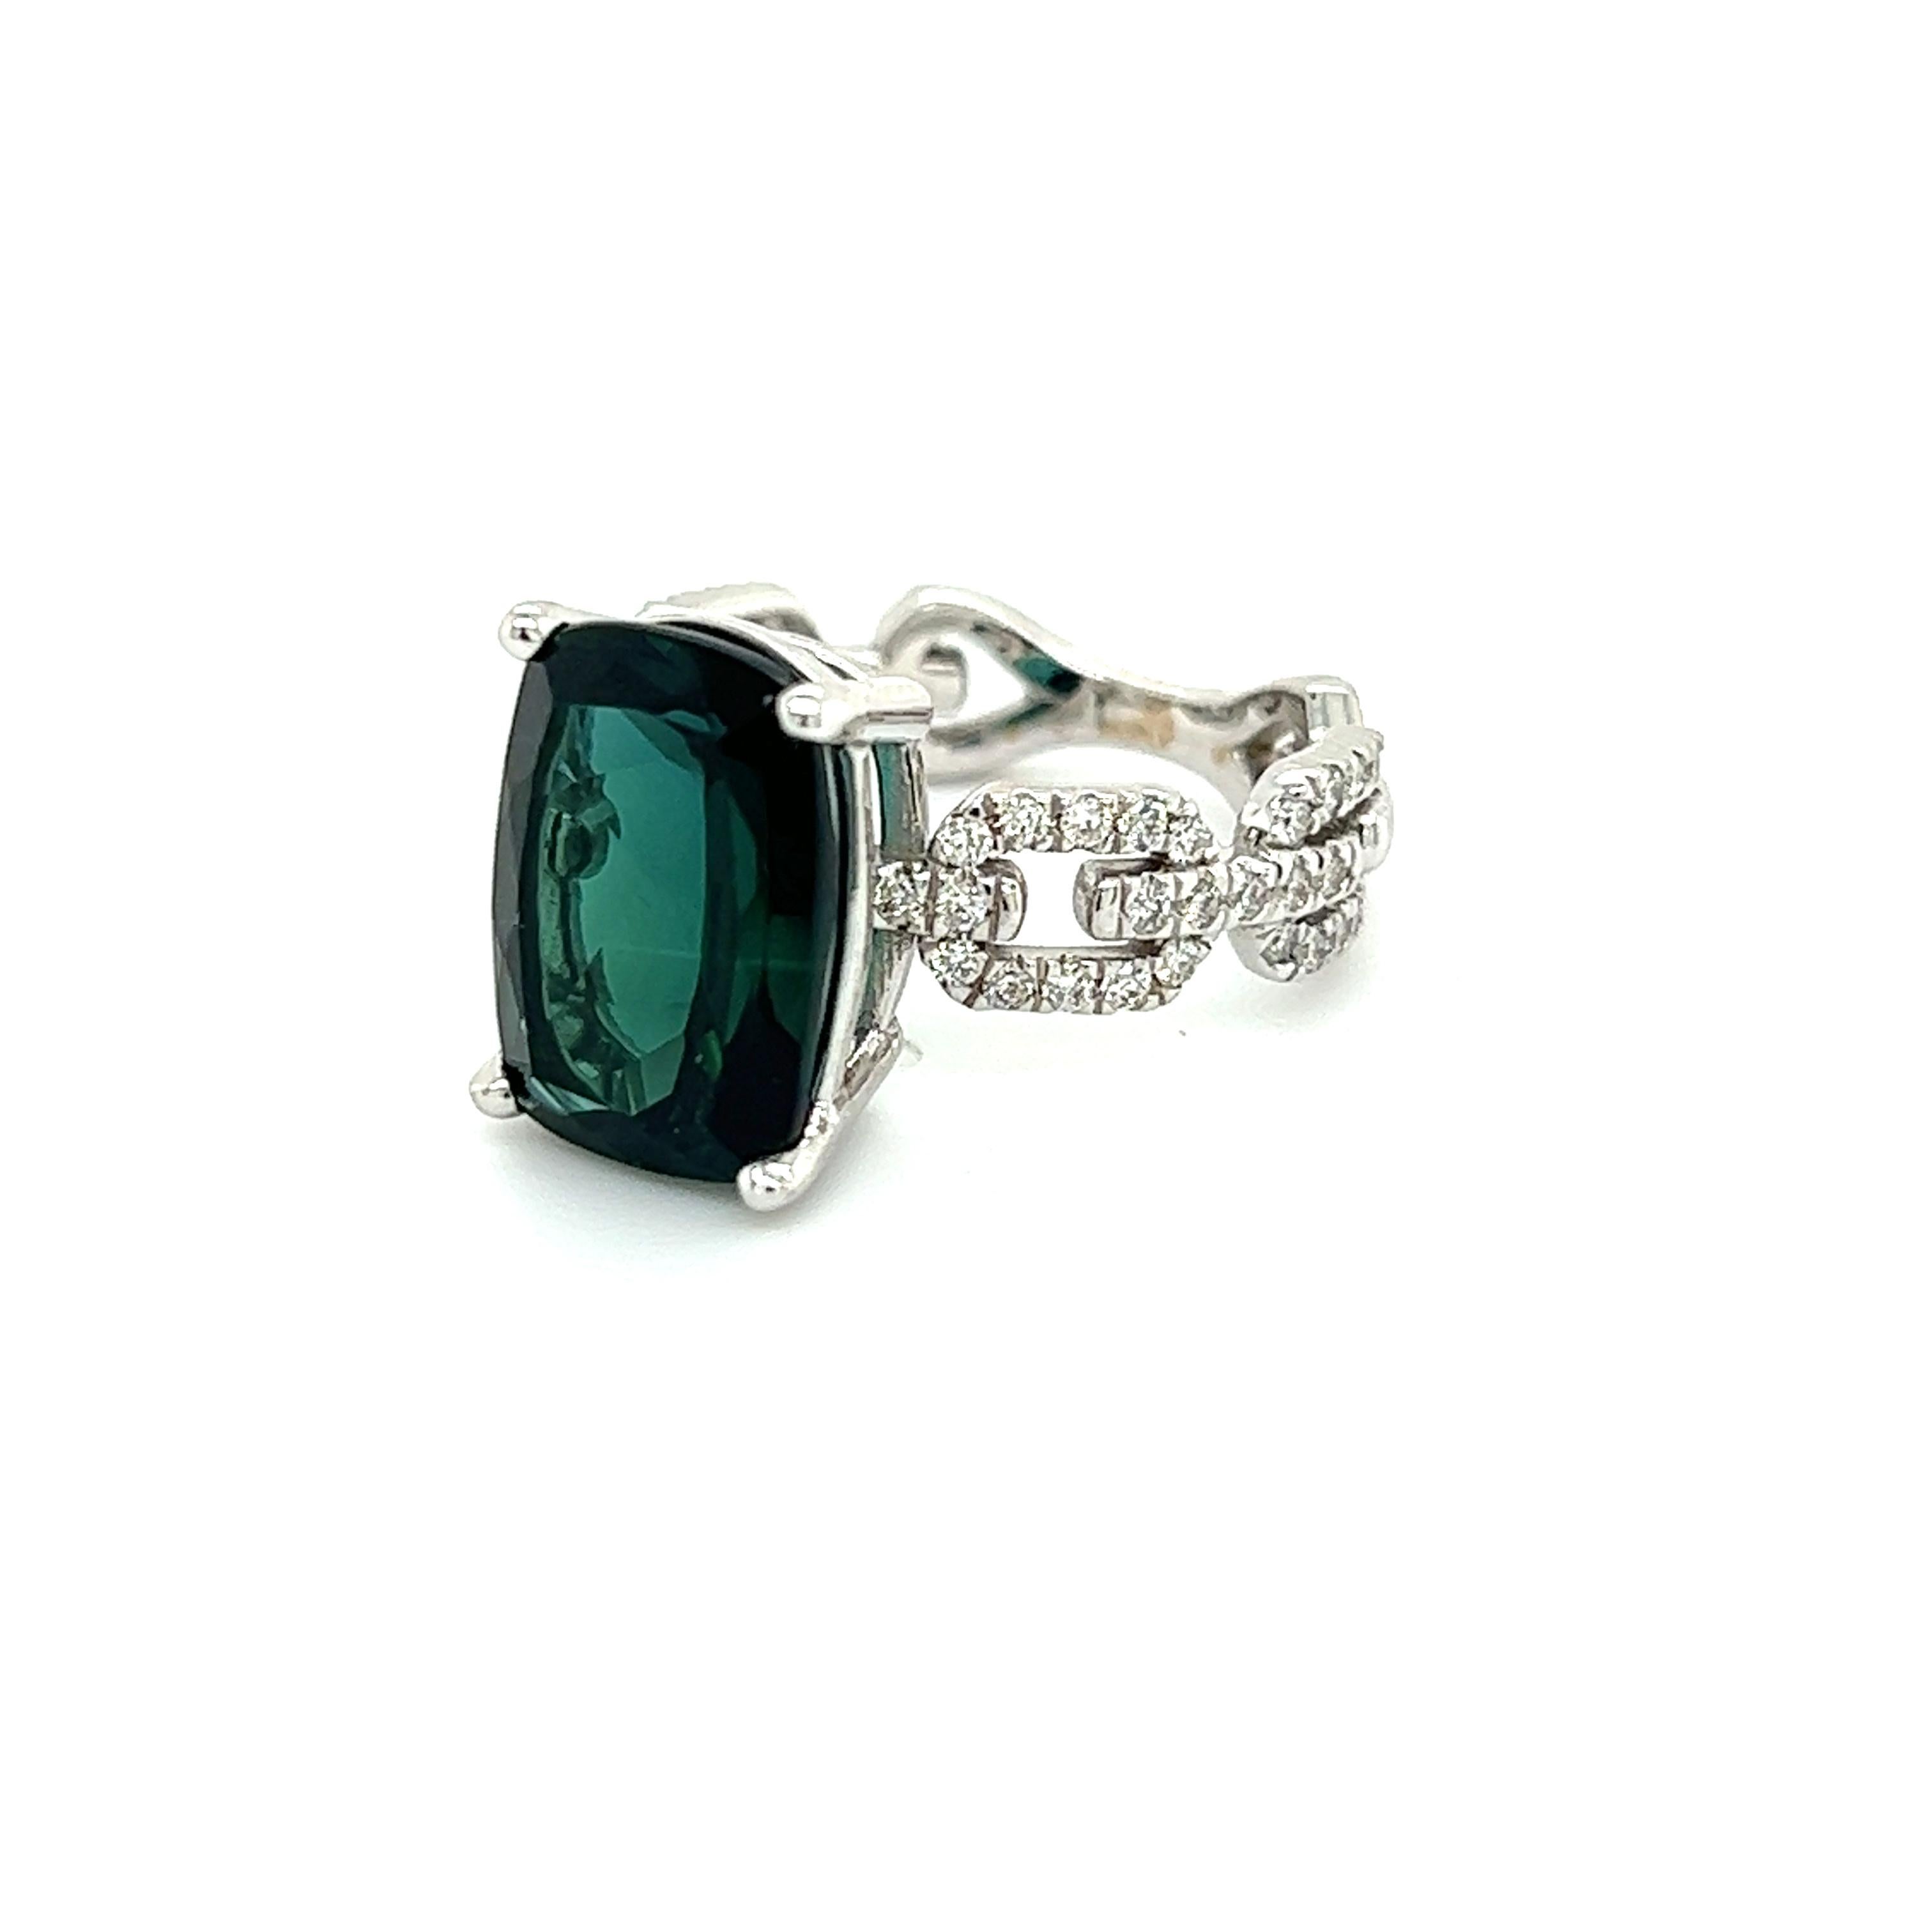 Natural Tourmaline Diamond Ring 6.5 14k White Gold 6.32 TCW Certified For Sale 5